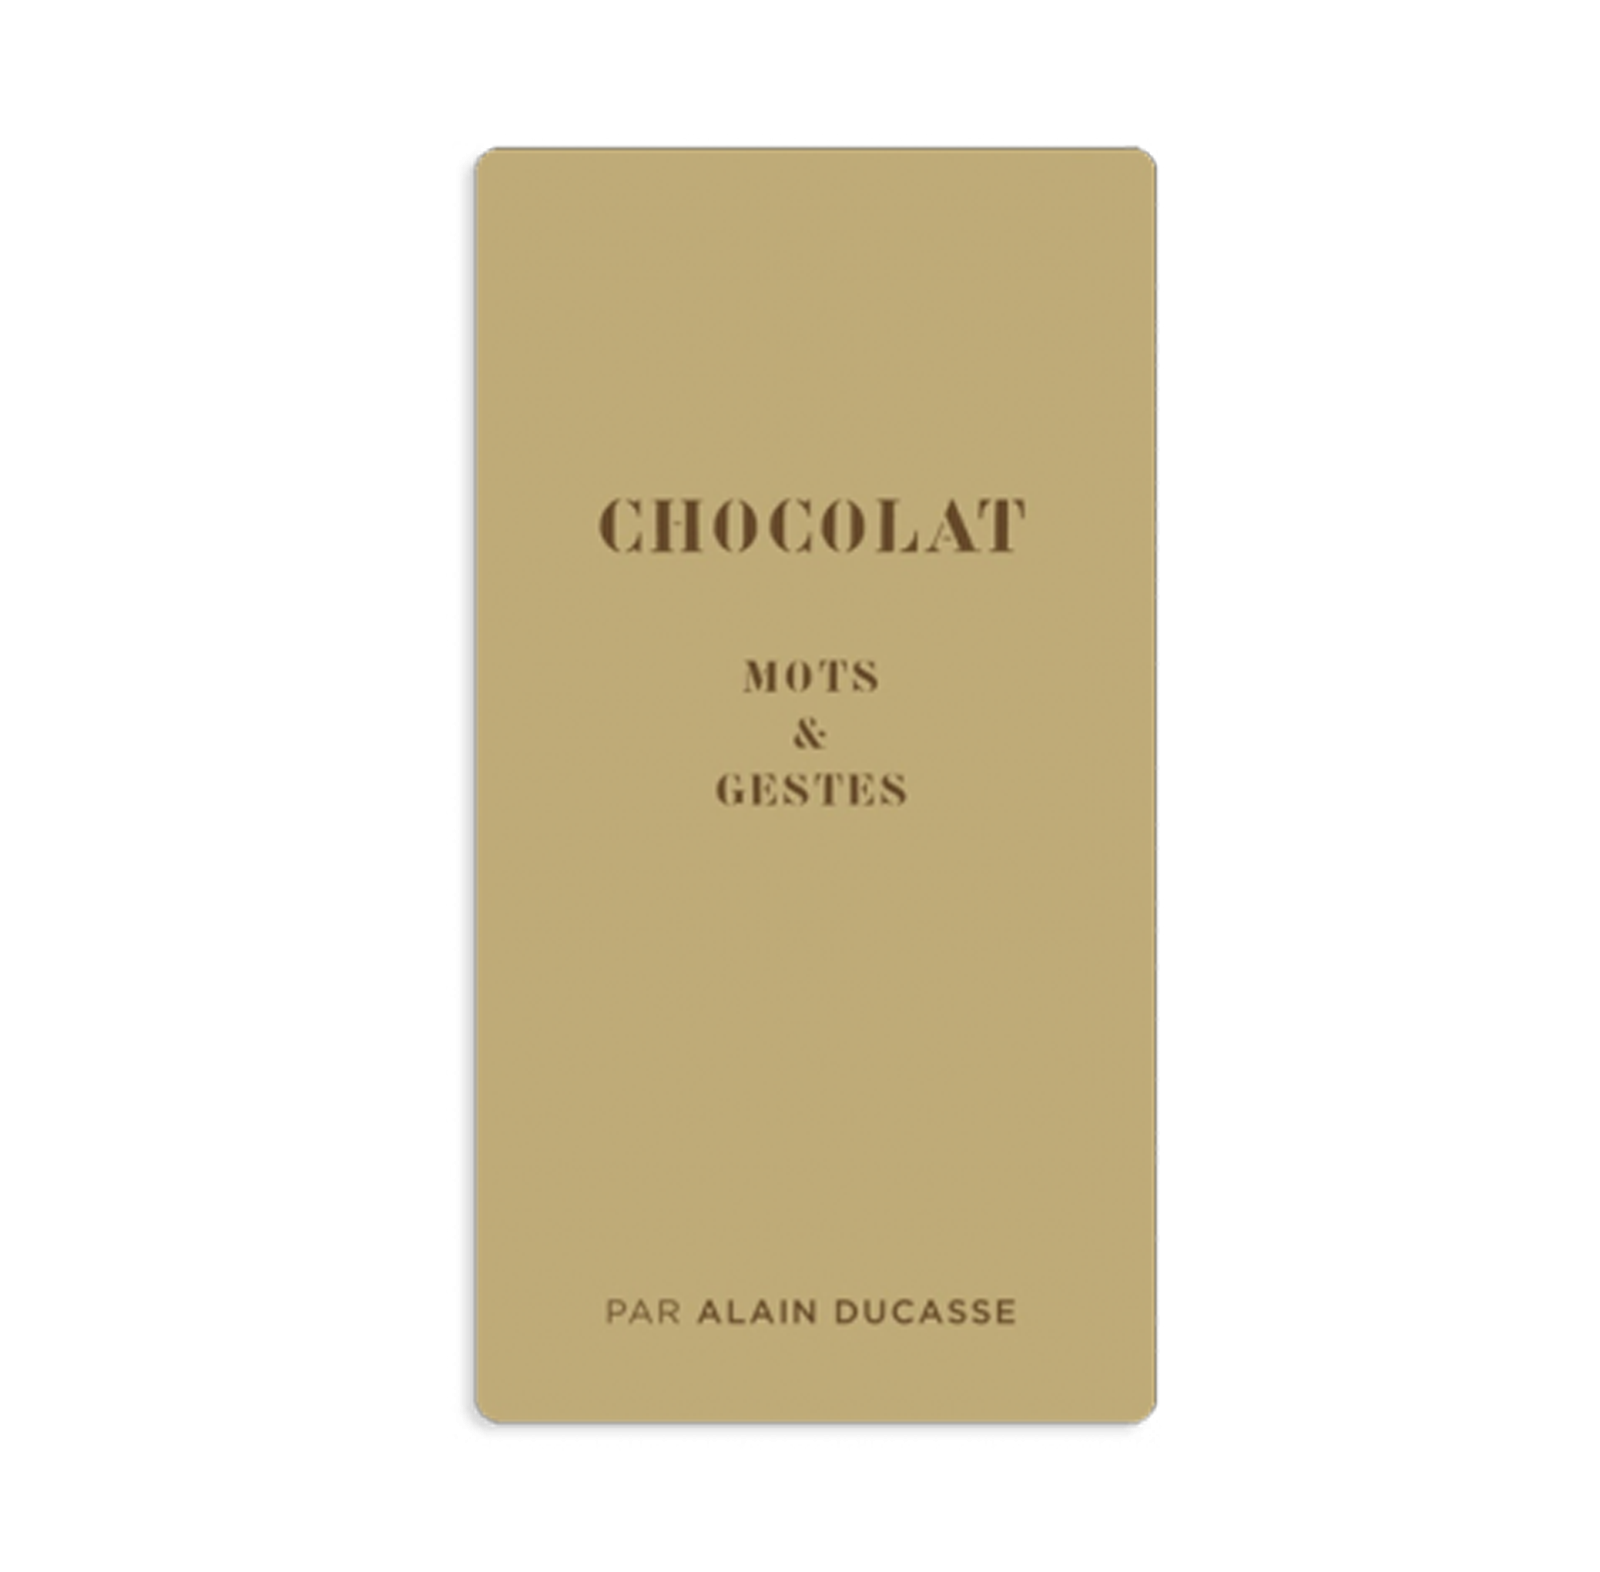 Mots & Gestes by Alain Ducasse - French edition